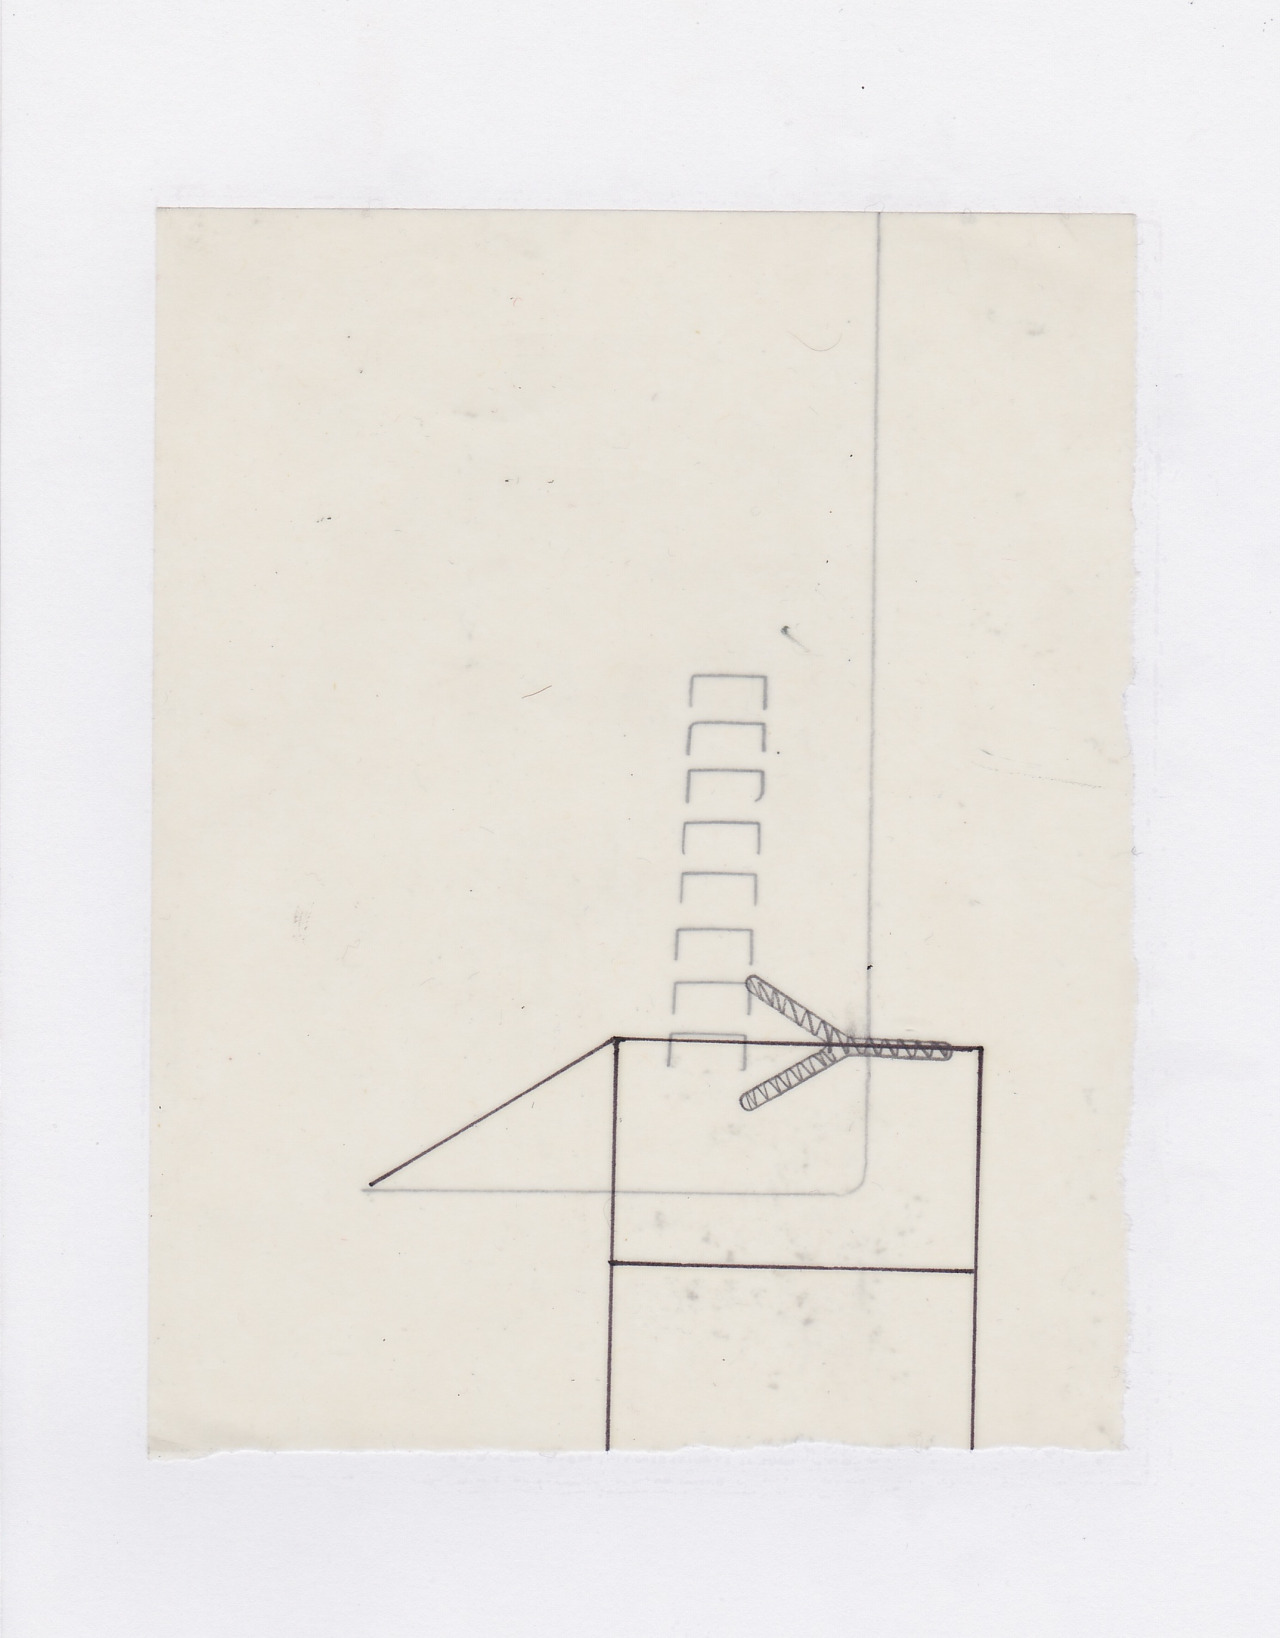 Untitled (the city, observations 16)  Pencil on layered(x2) oiled fabriano paper.  140mm x 180mm  December 2013